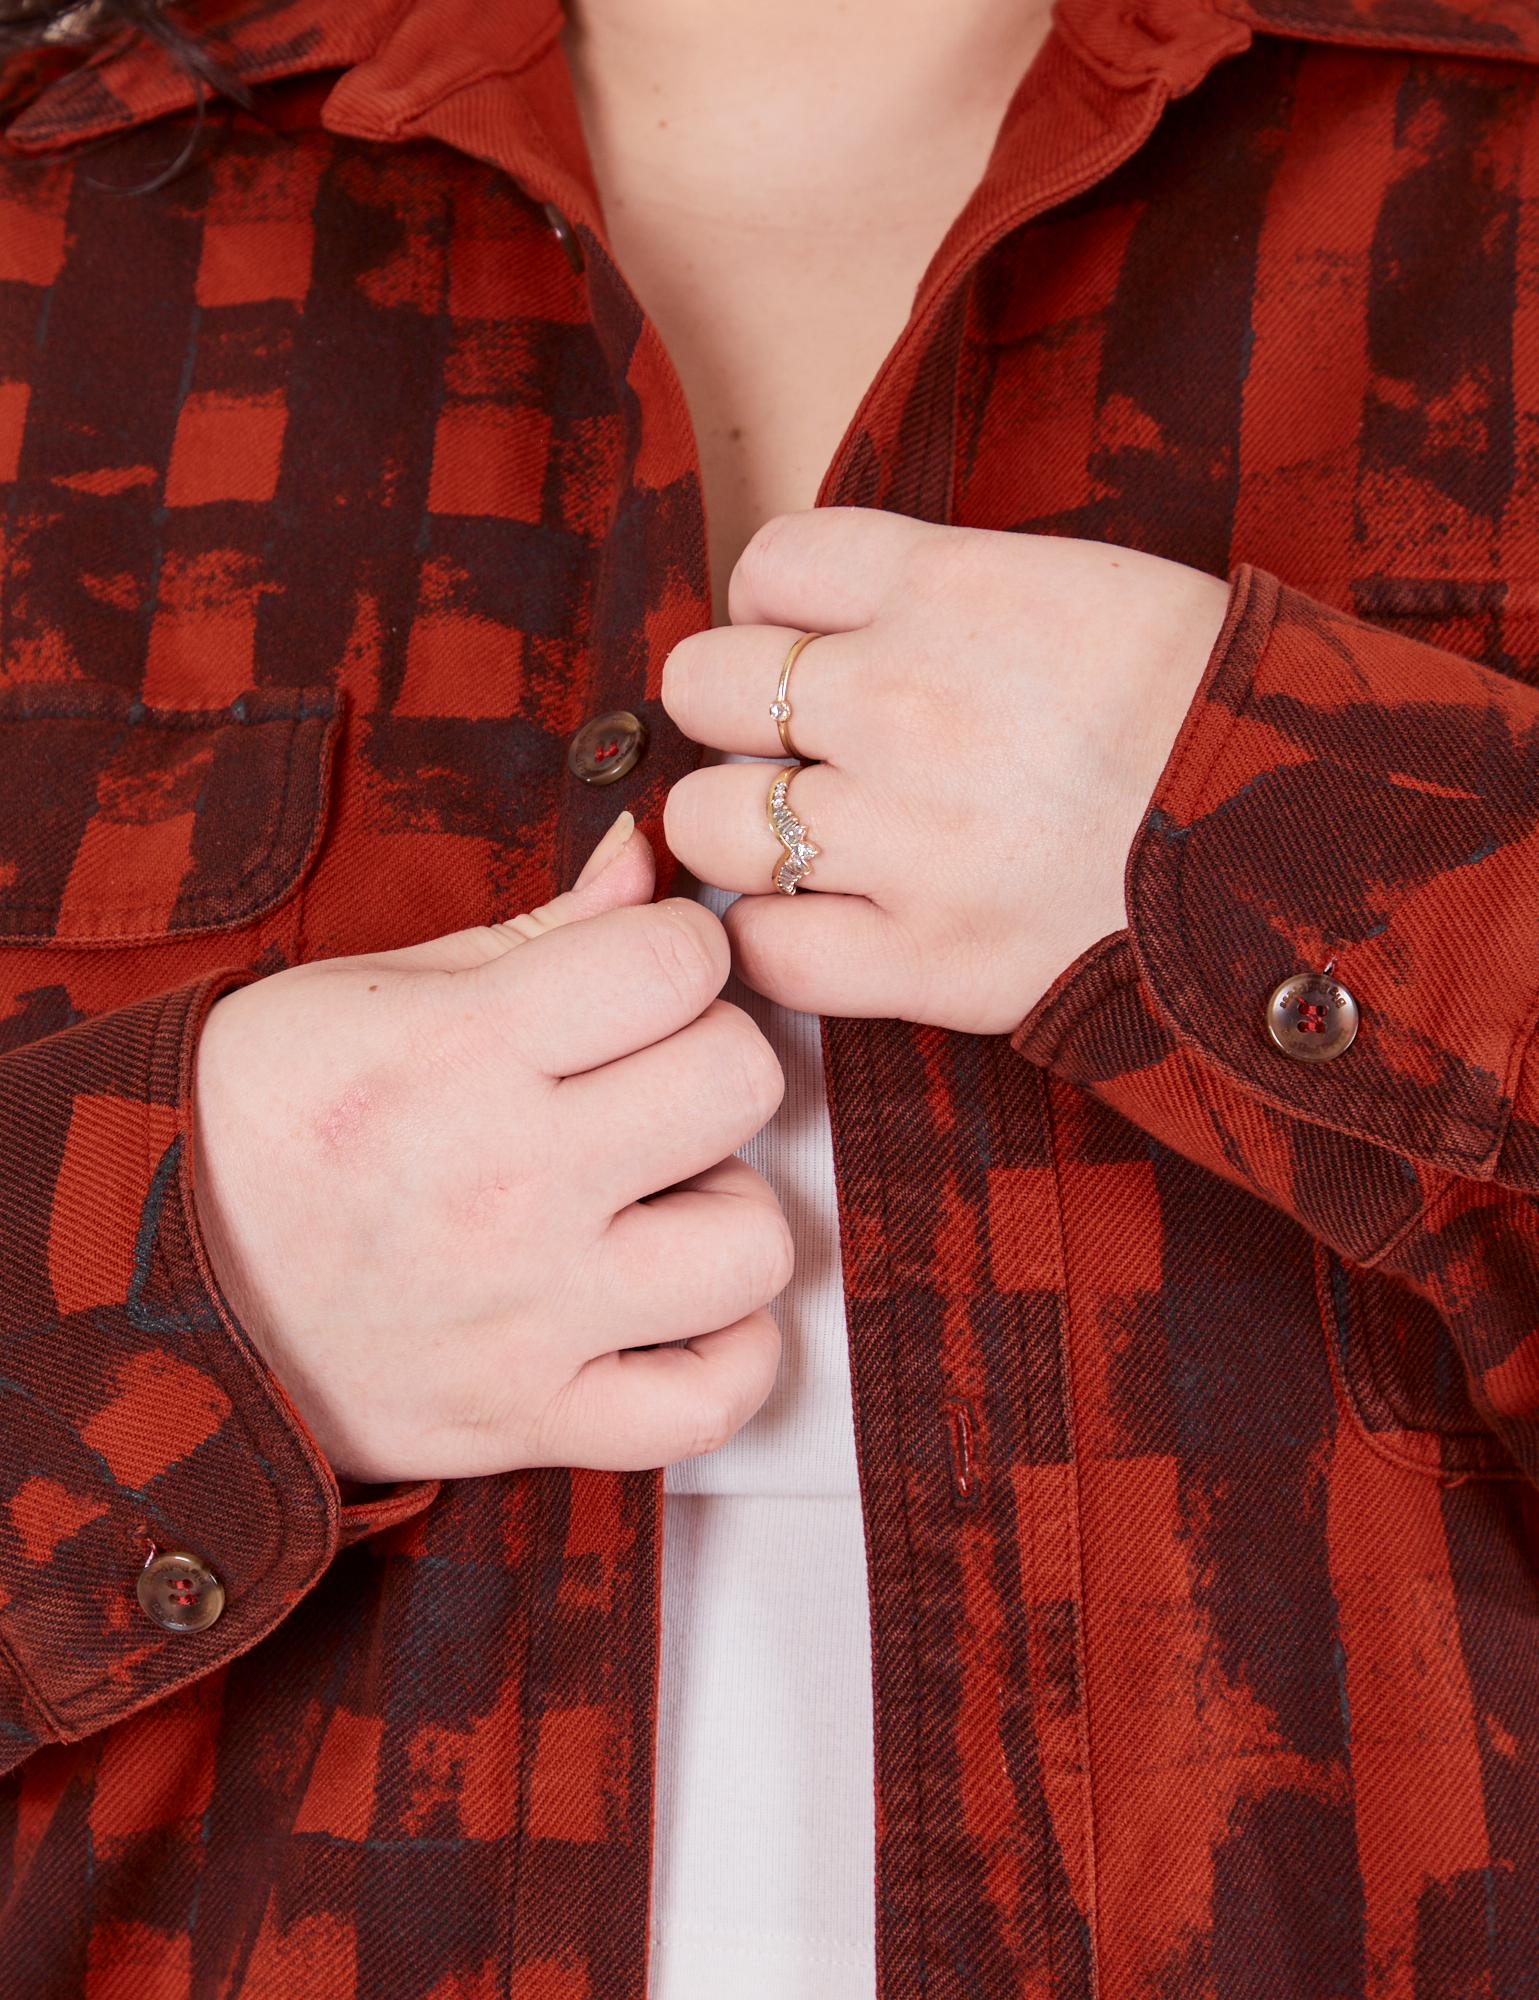 Plaid Flannel Overshirt in Paprika front close up on Ashley